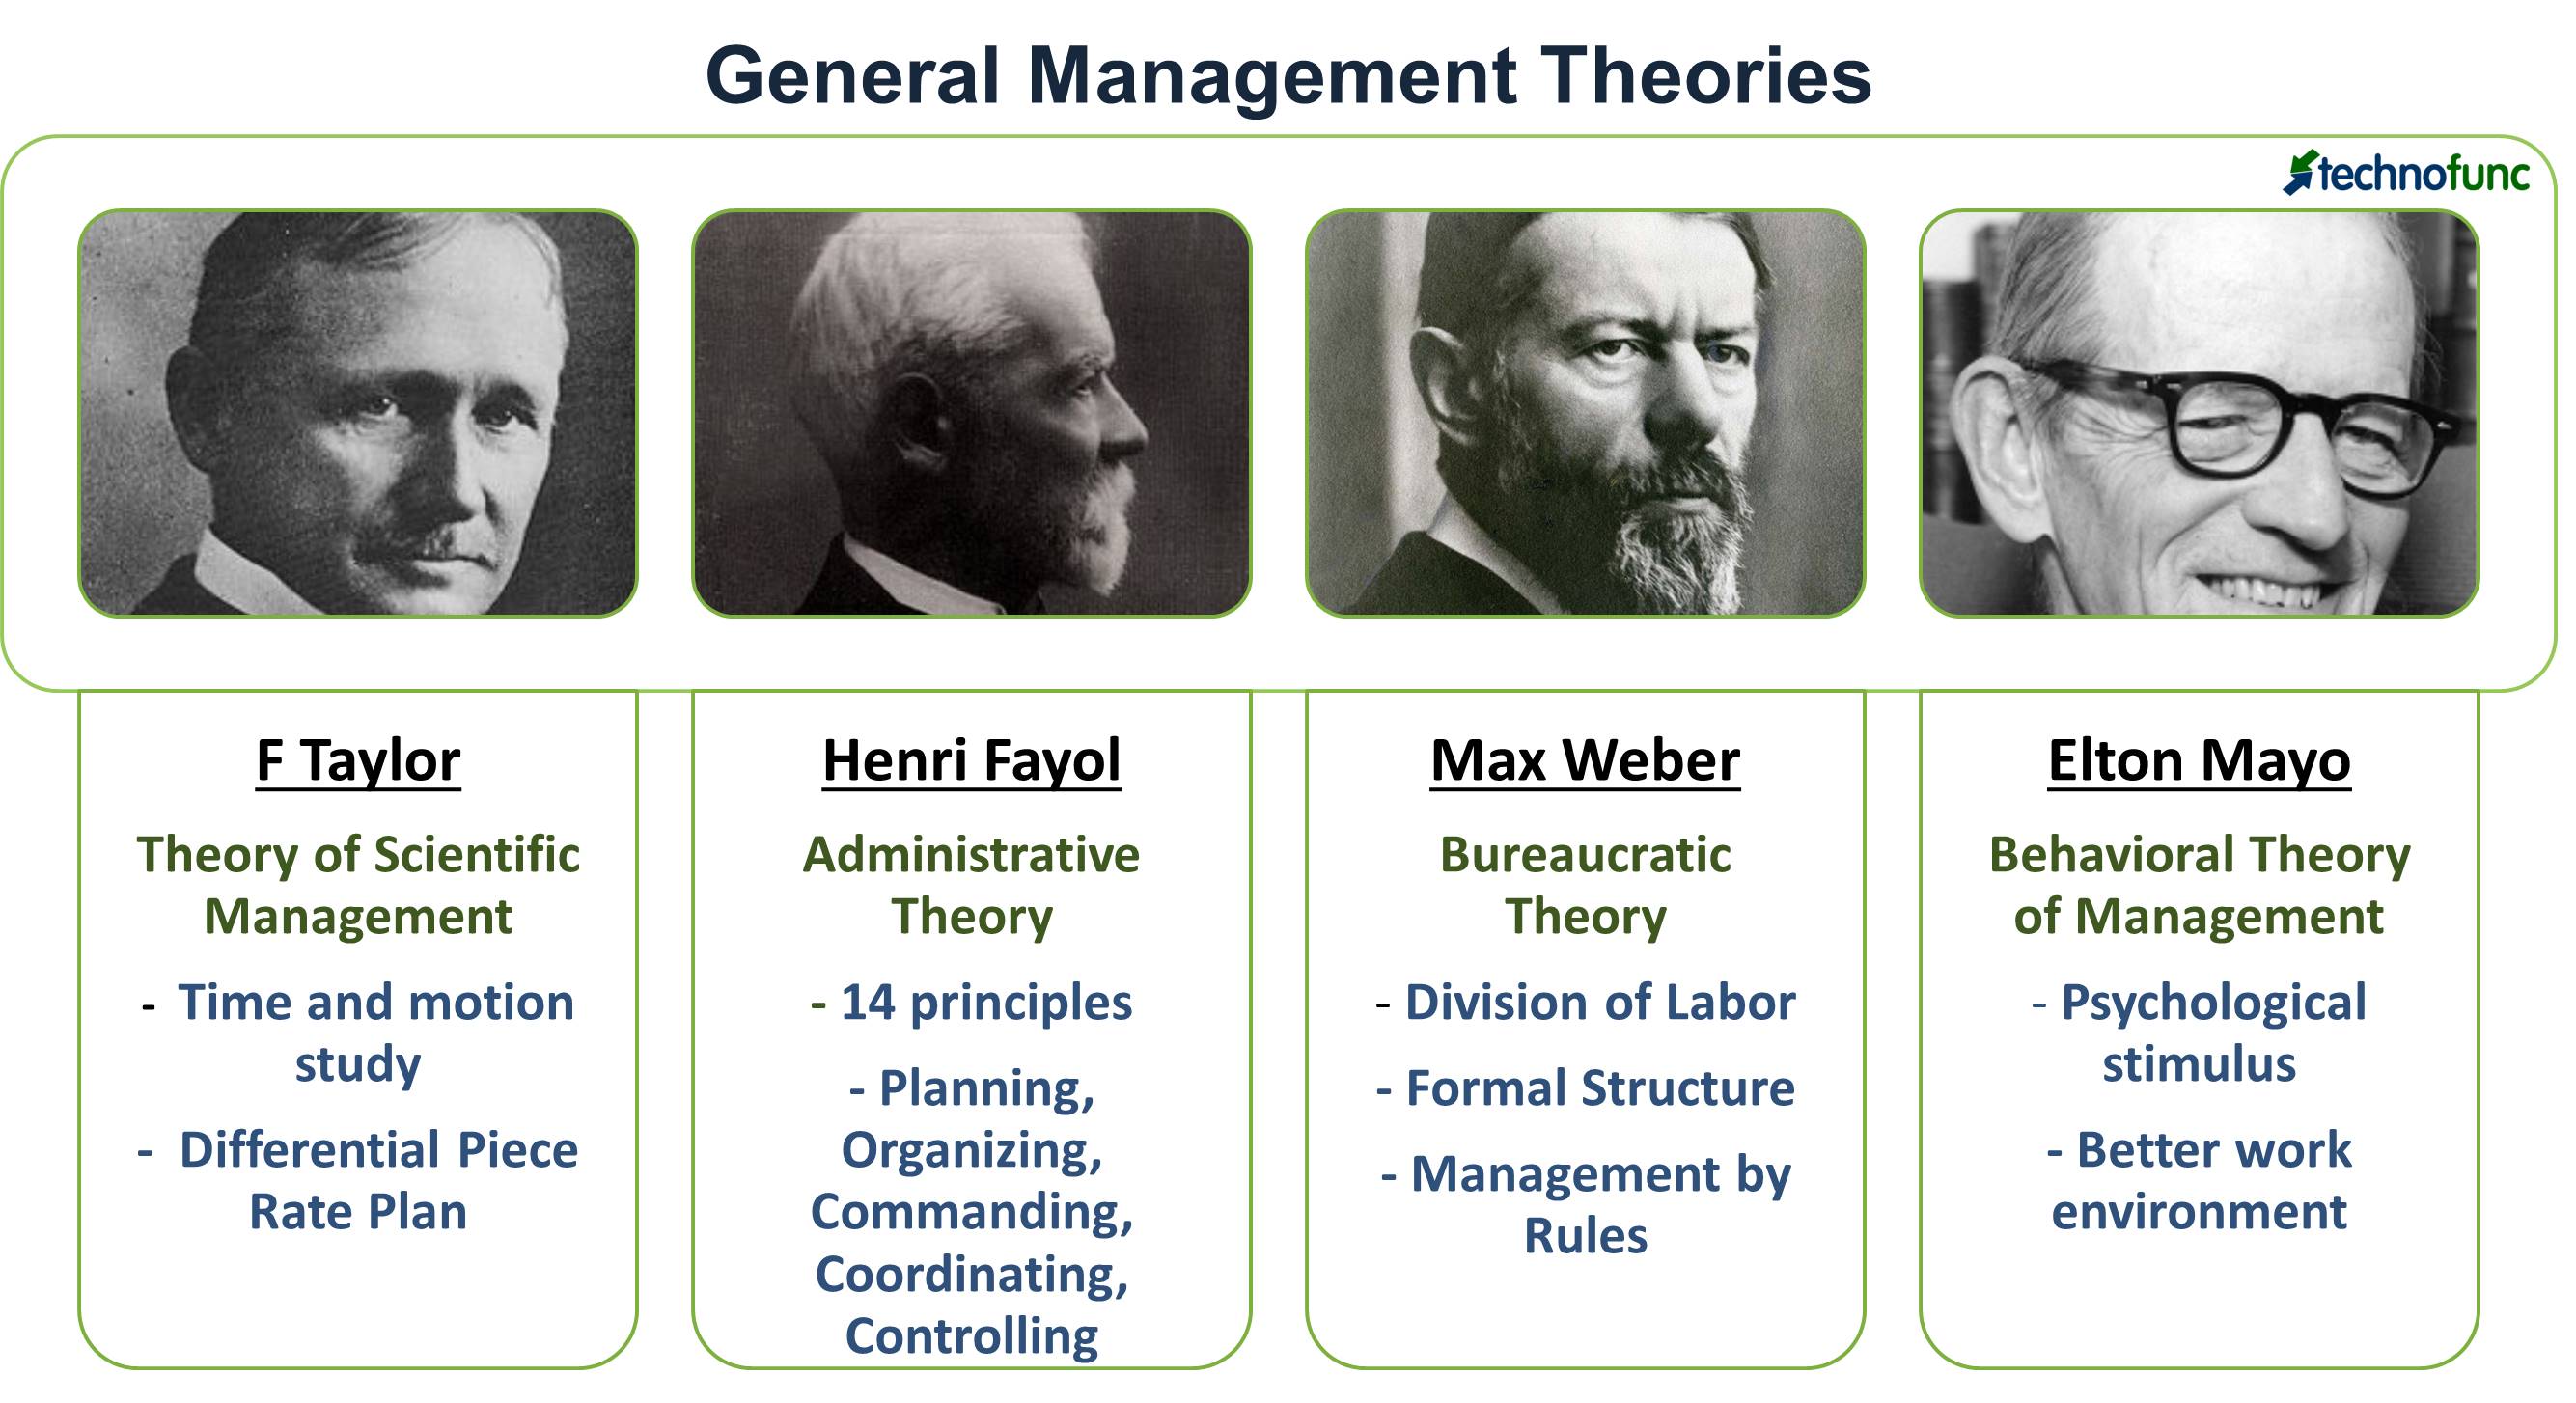 Who is the famous management theorist?